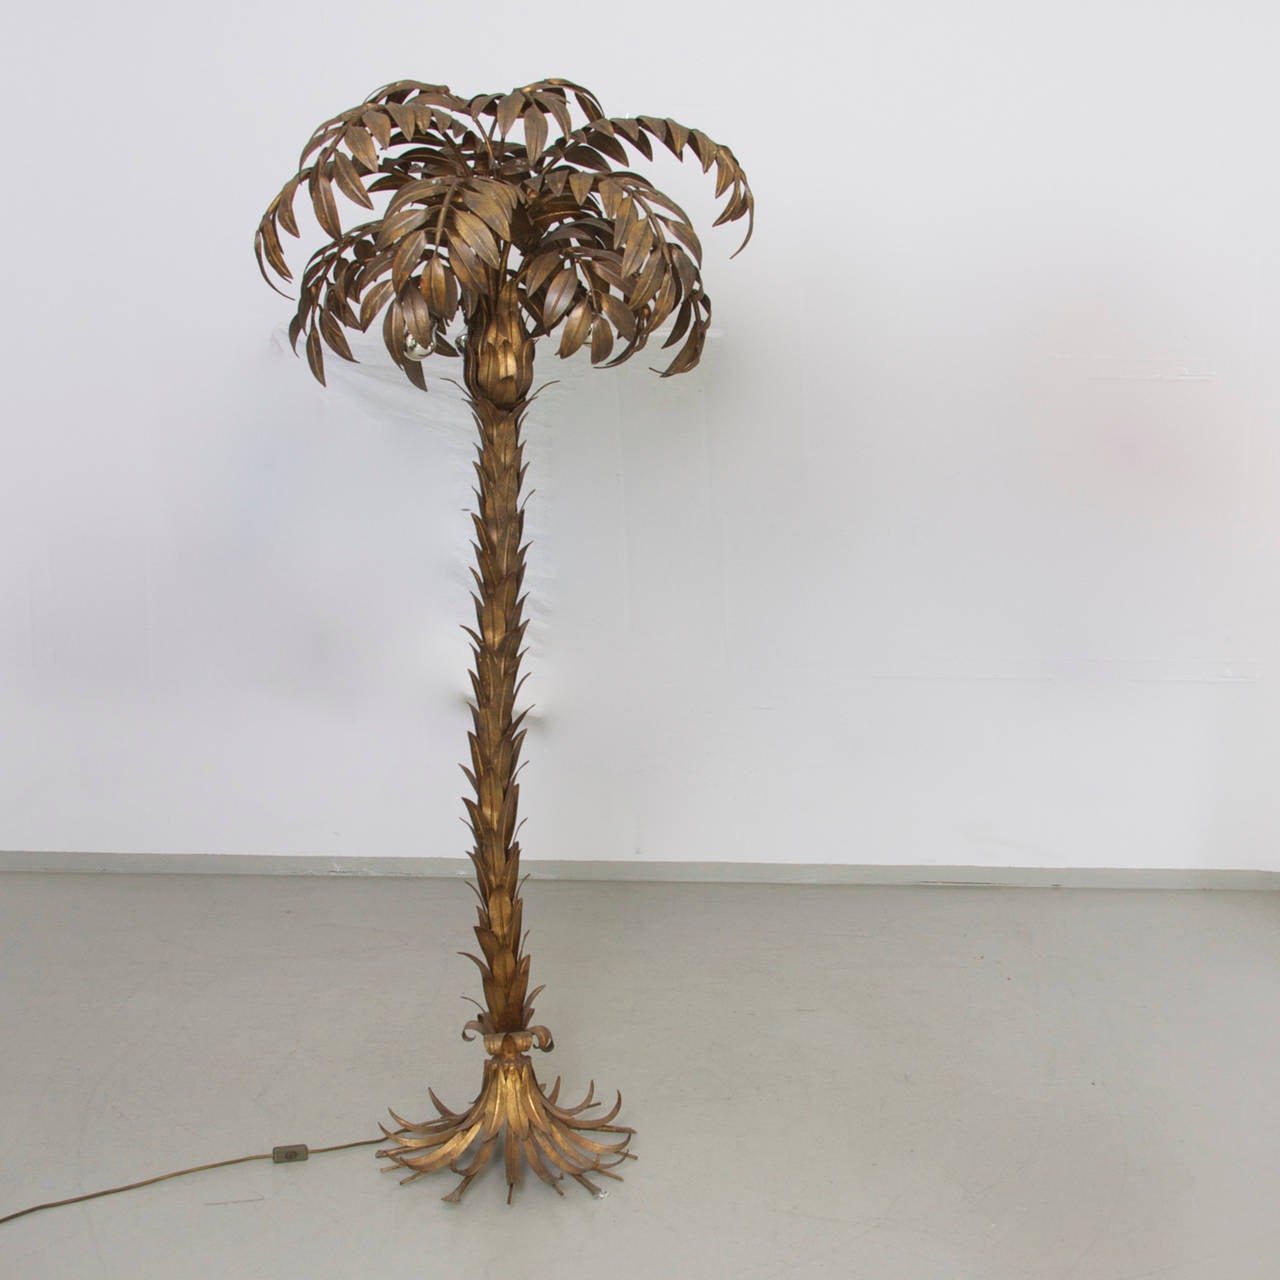 Huge palm tree lamp from the 1970s of the German designer Hans Kögl. The lamp is made of gold-plated metal and cast significant light shadows for a fantastic atmosphere. Dimensions: 3 x E27. Strong patina!